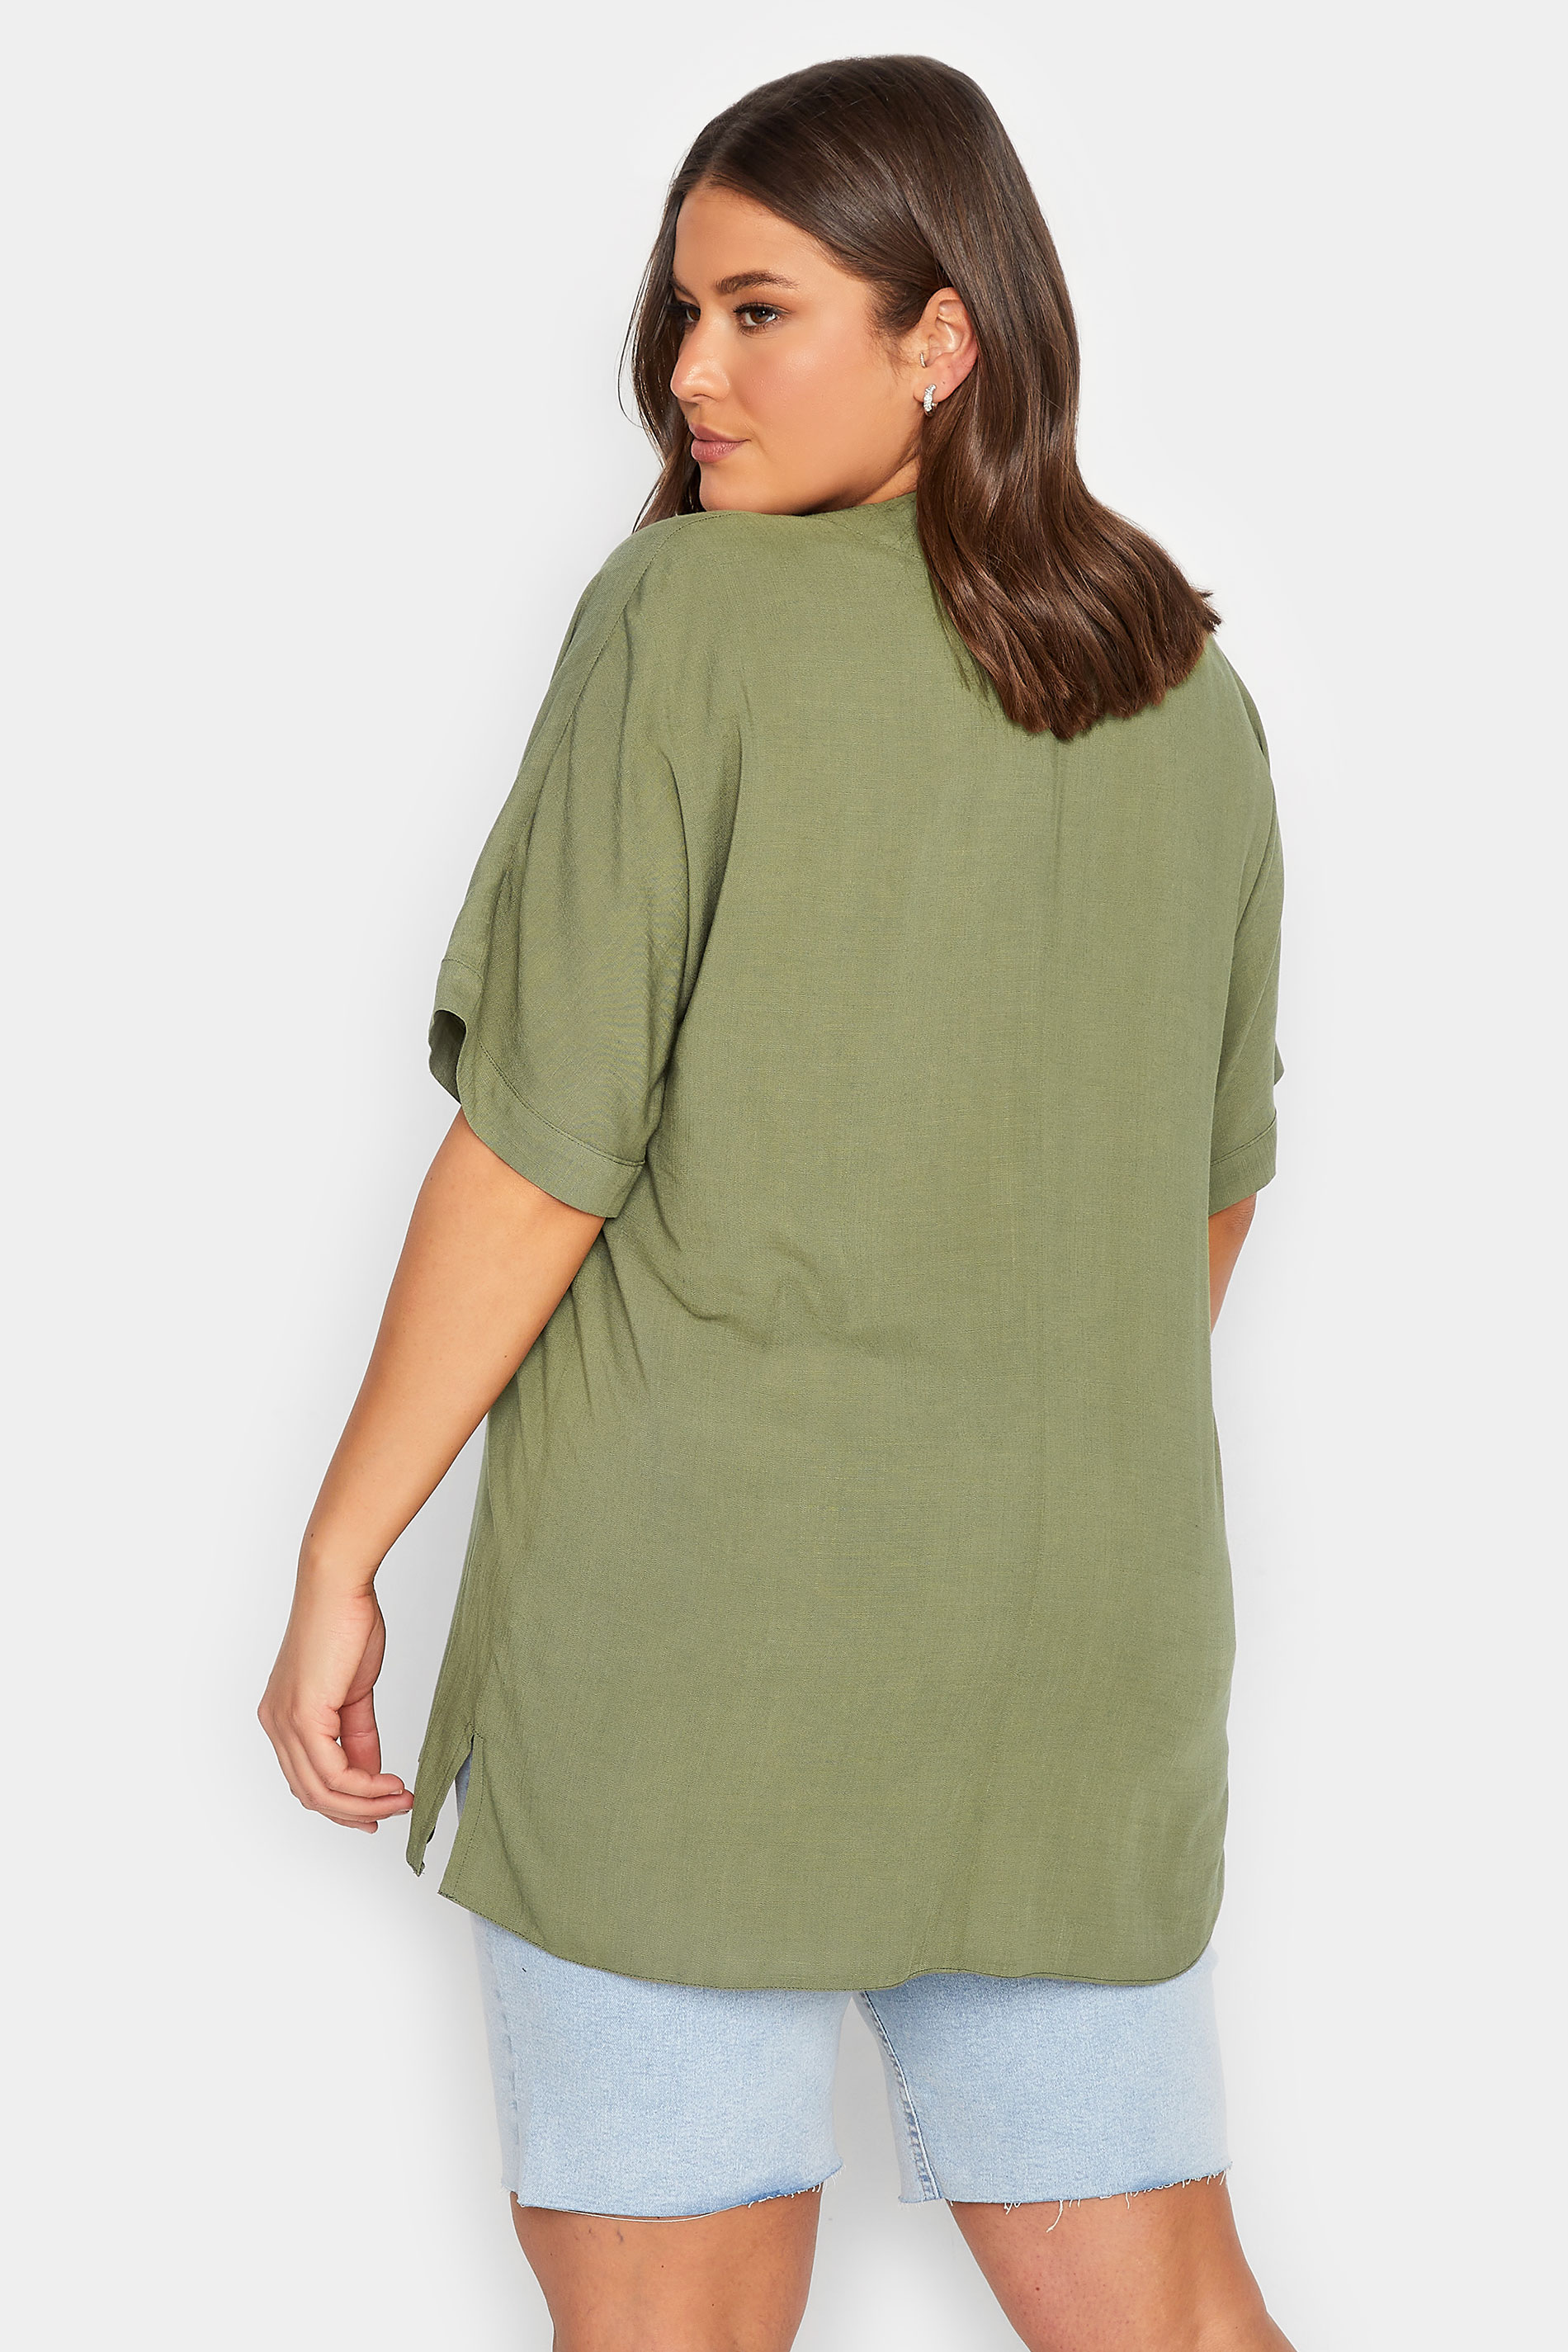 YOURS Curve Plus Size Khaki Green Marl V-Neck Top 3